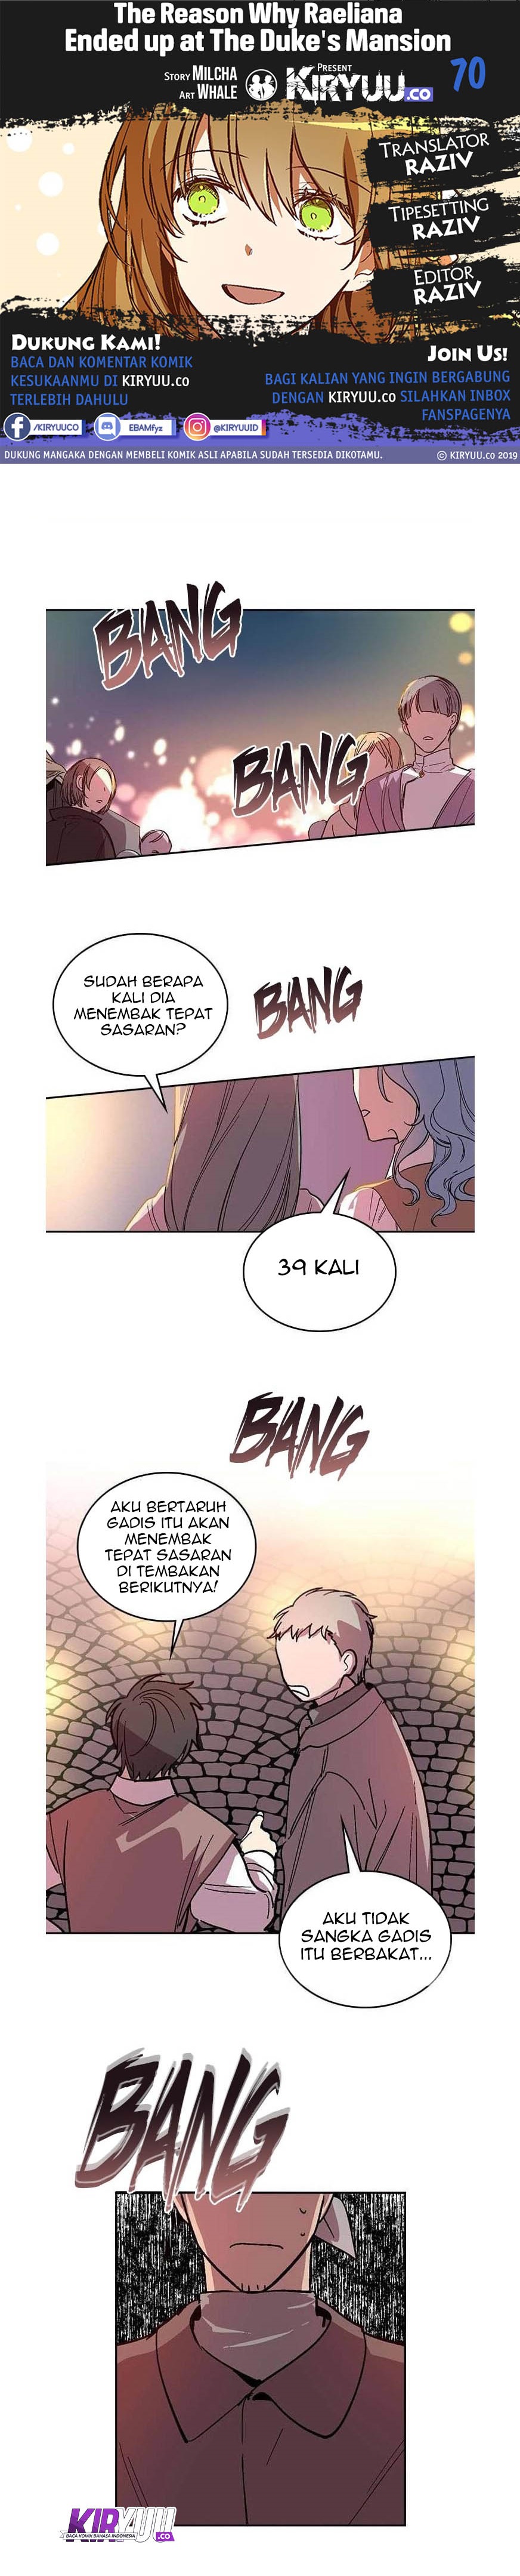 The Reason Why Raeliana Ended up at the Duke’s Mansion Chapter 70